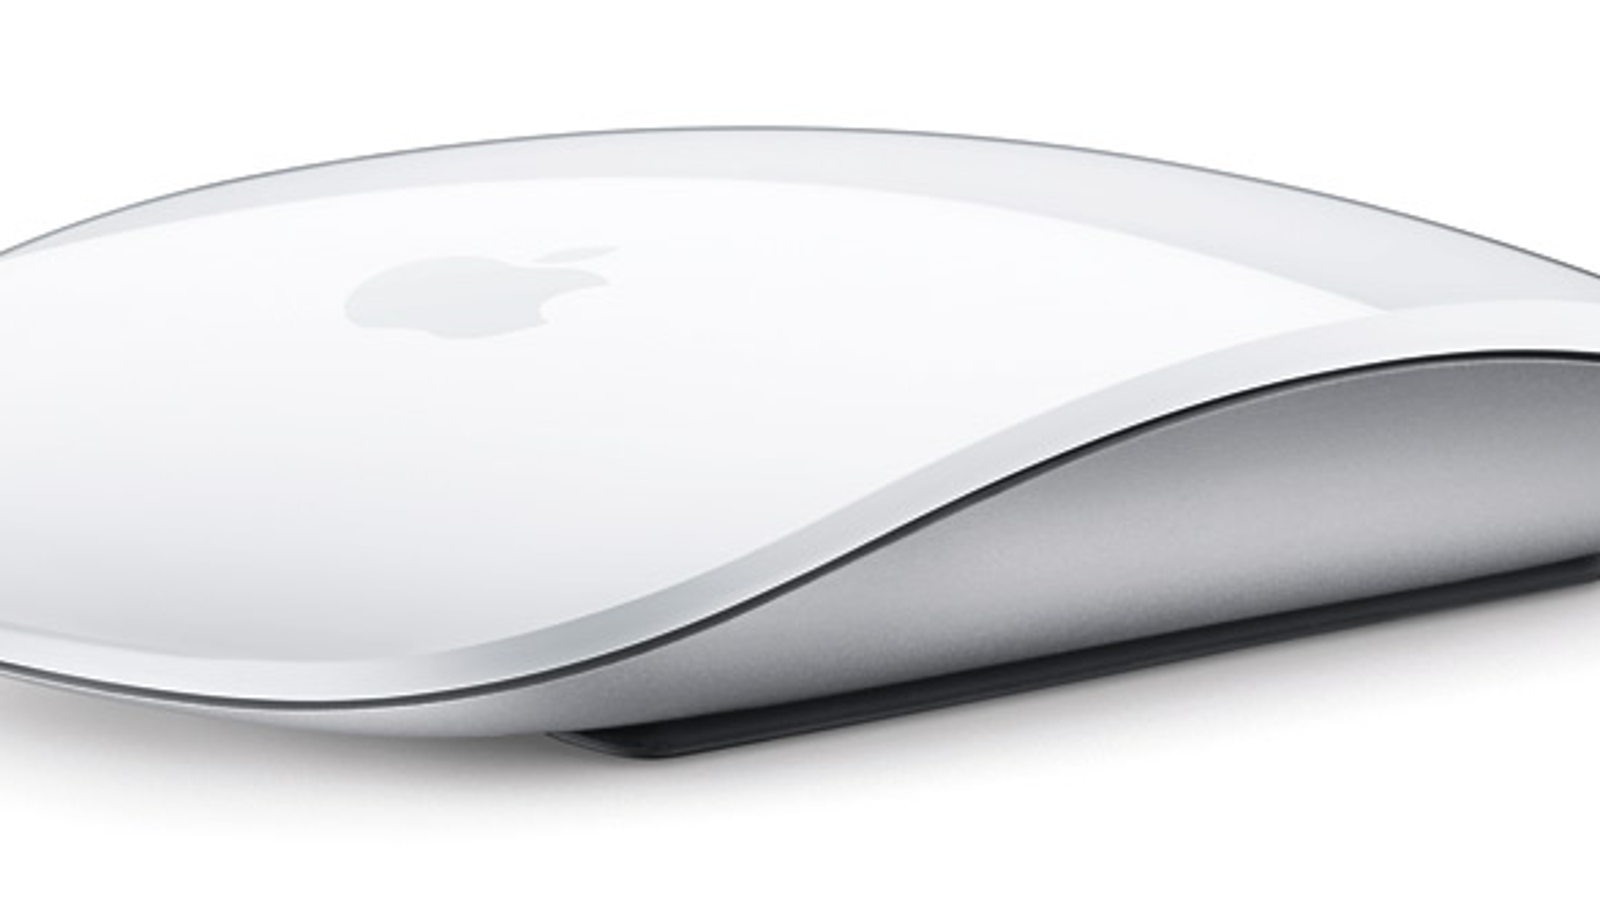 mac mouse for windows 10